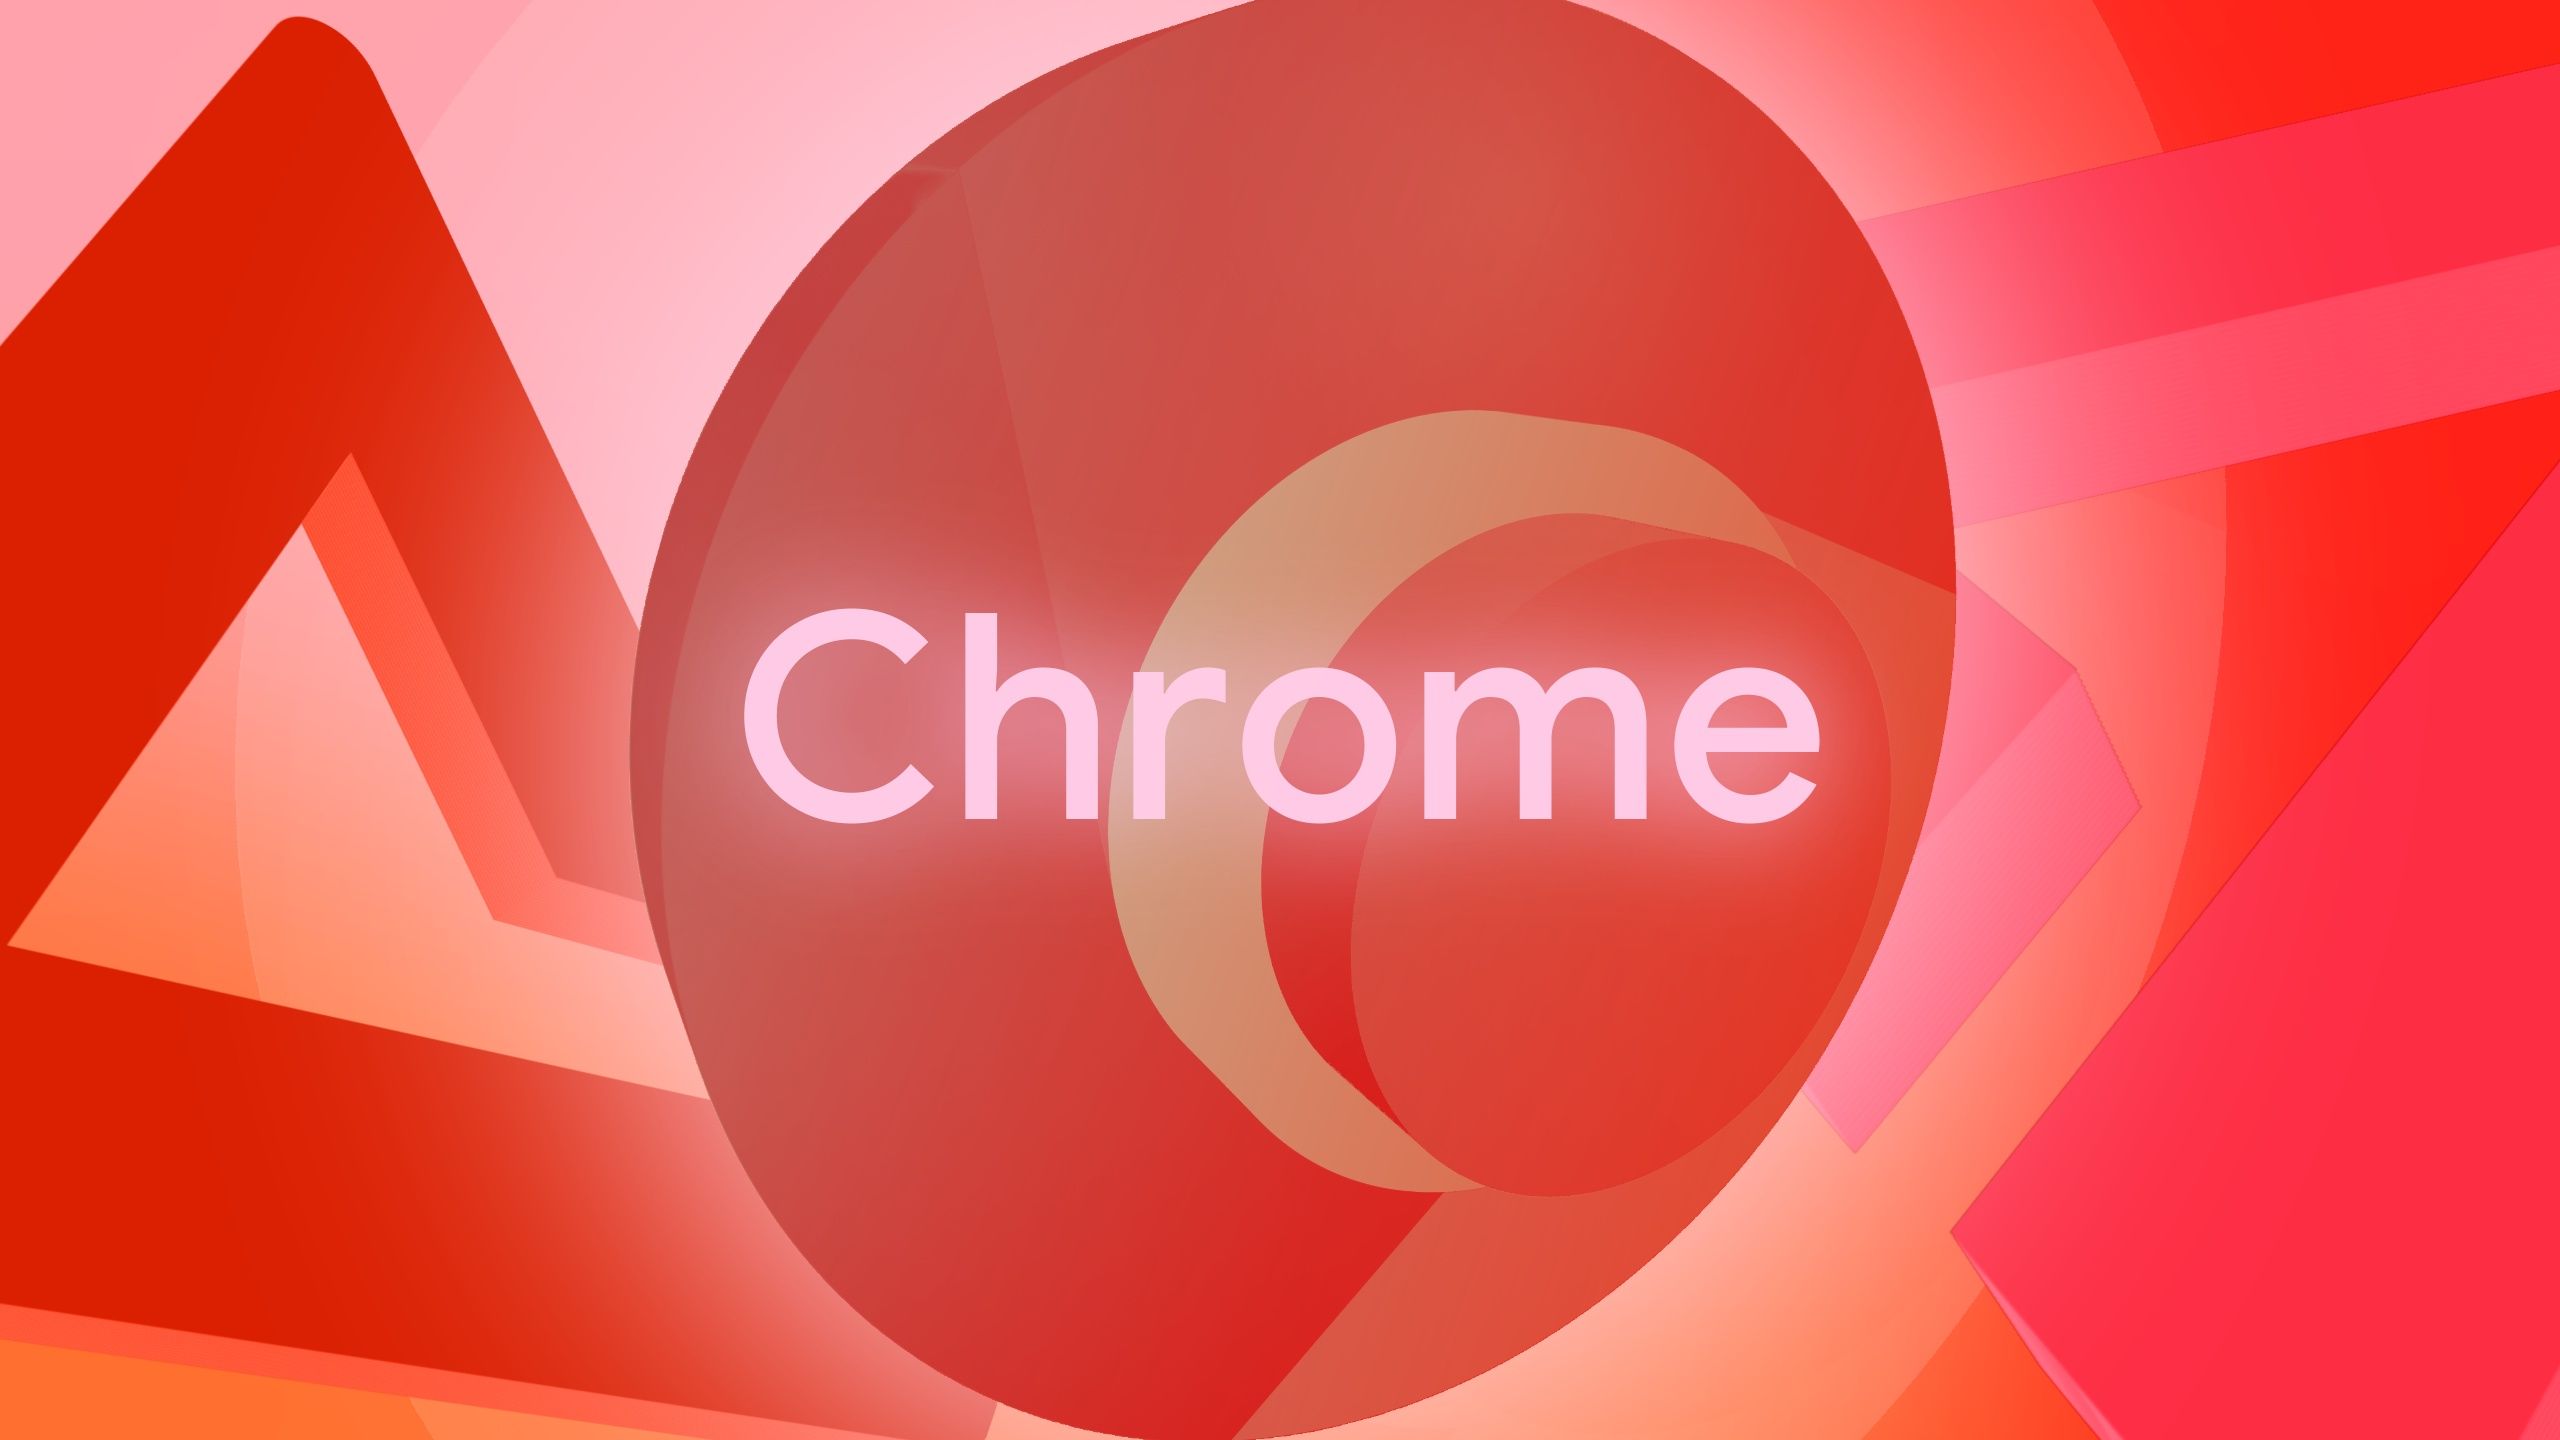 Google could offer one-click fixes for Chrome performance issues